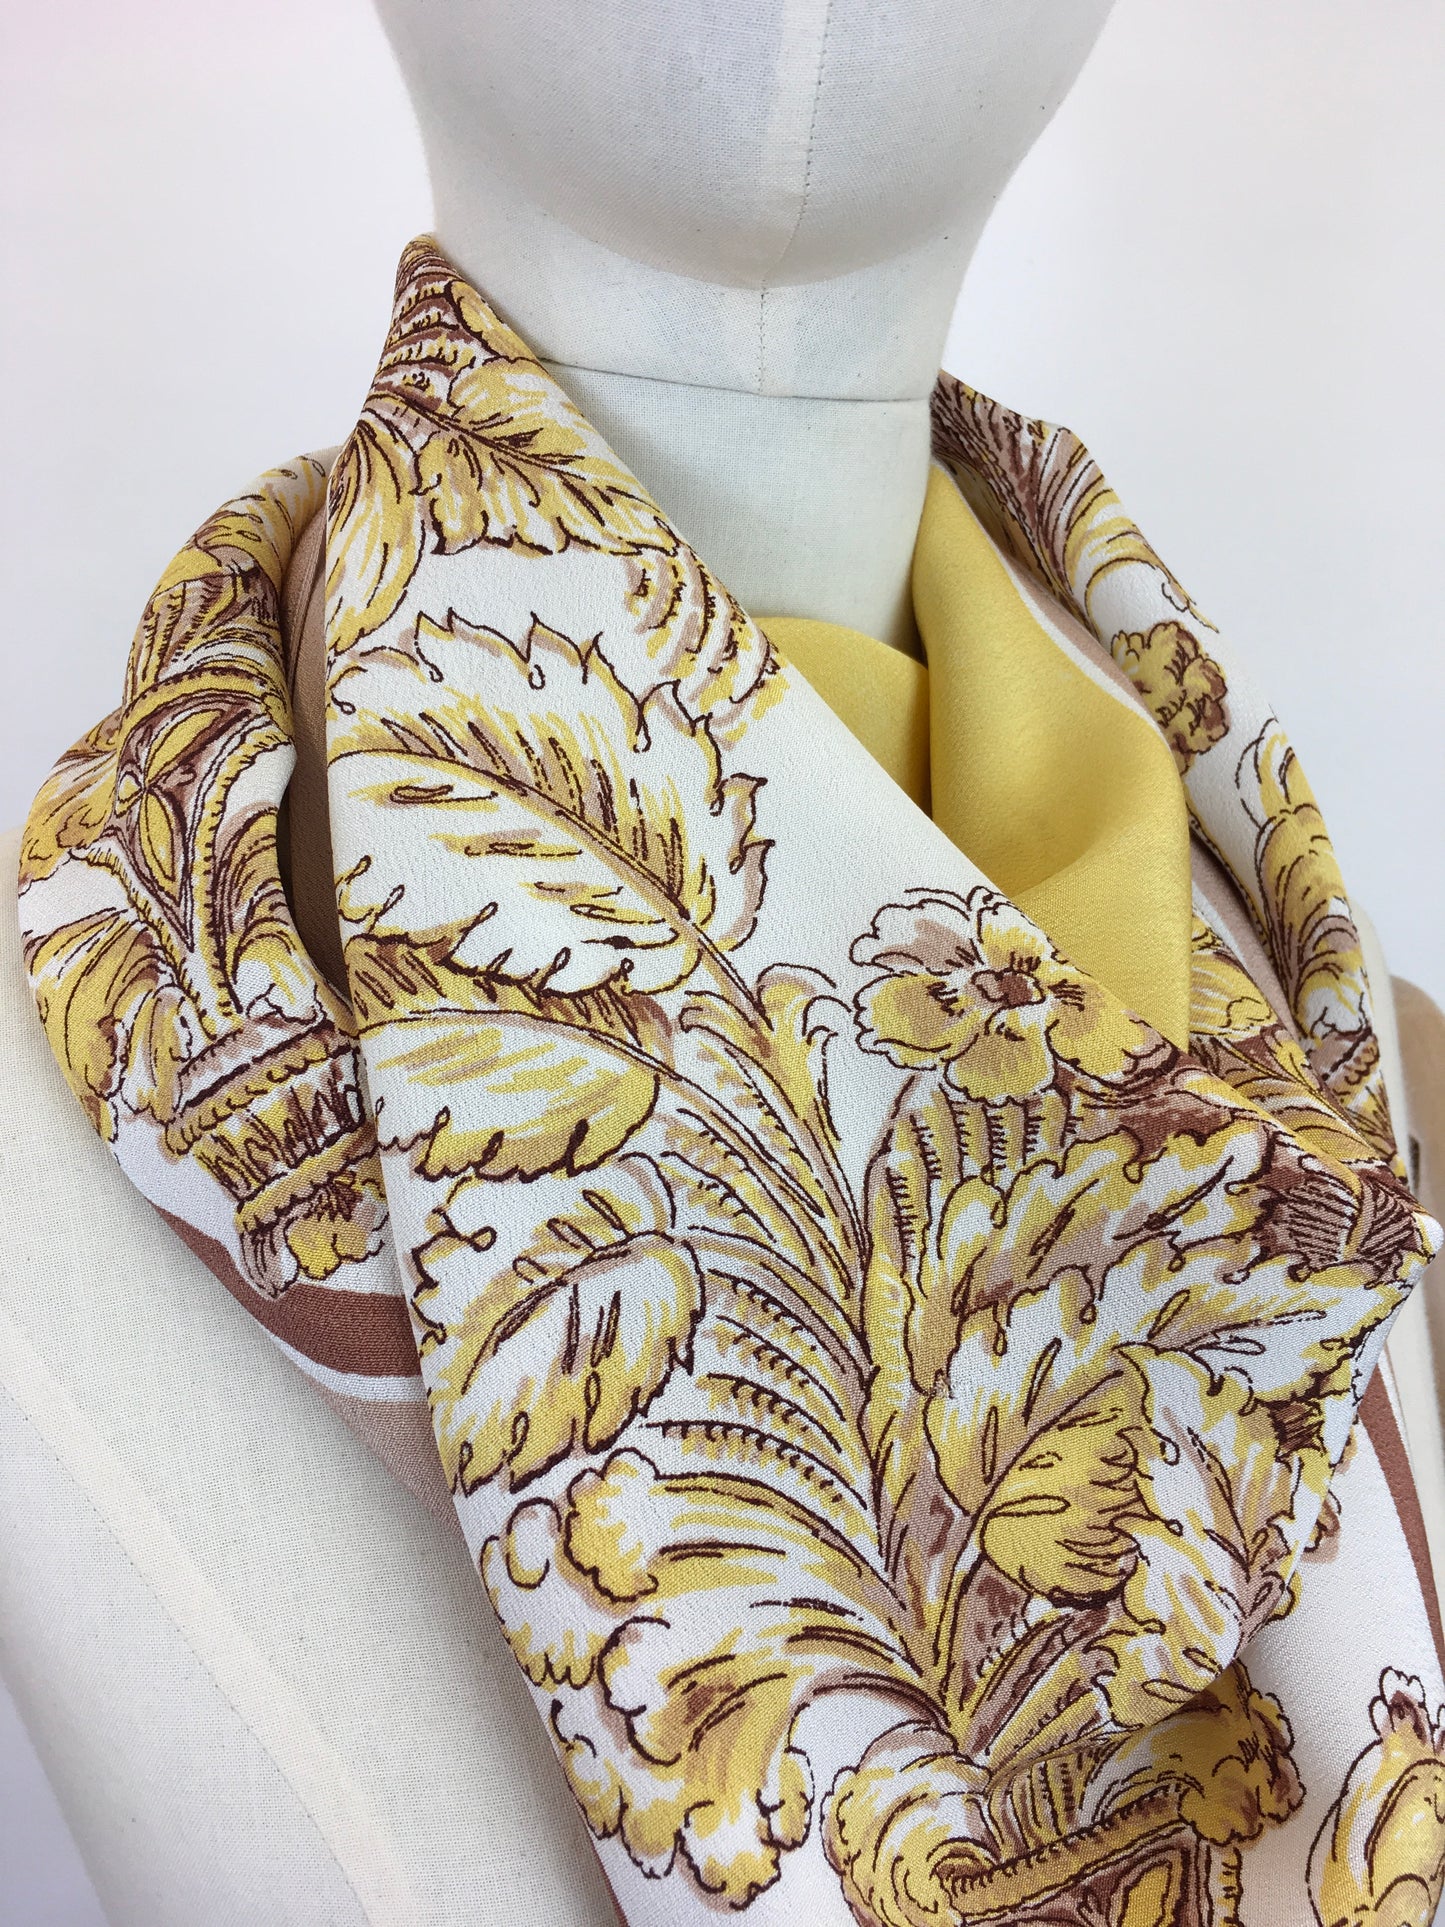 Original 1940s Fine Crepe Scarf - In A Beautiful Floral In Soft Yellows, Fawns, Warm Brown and Creams